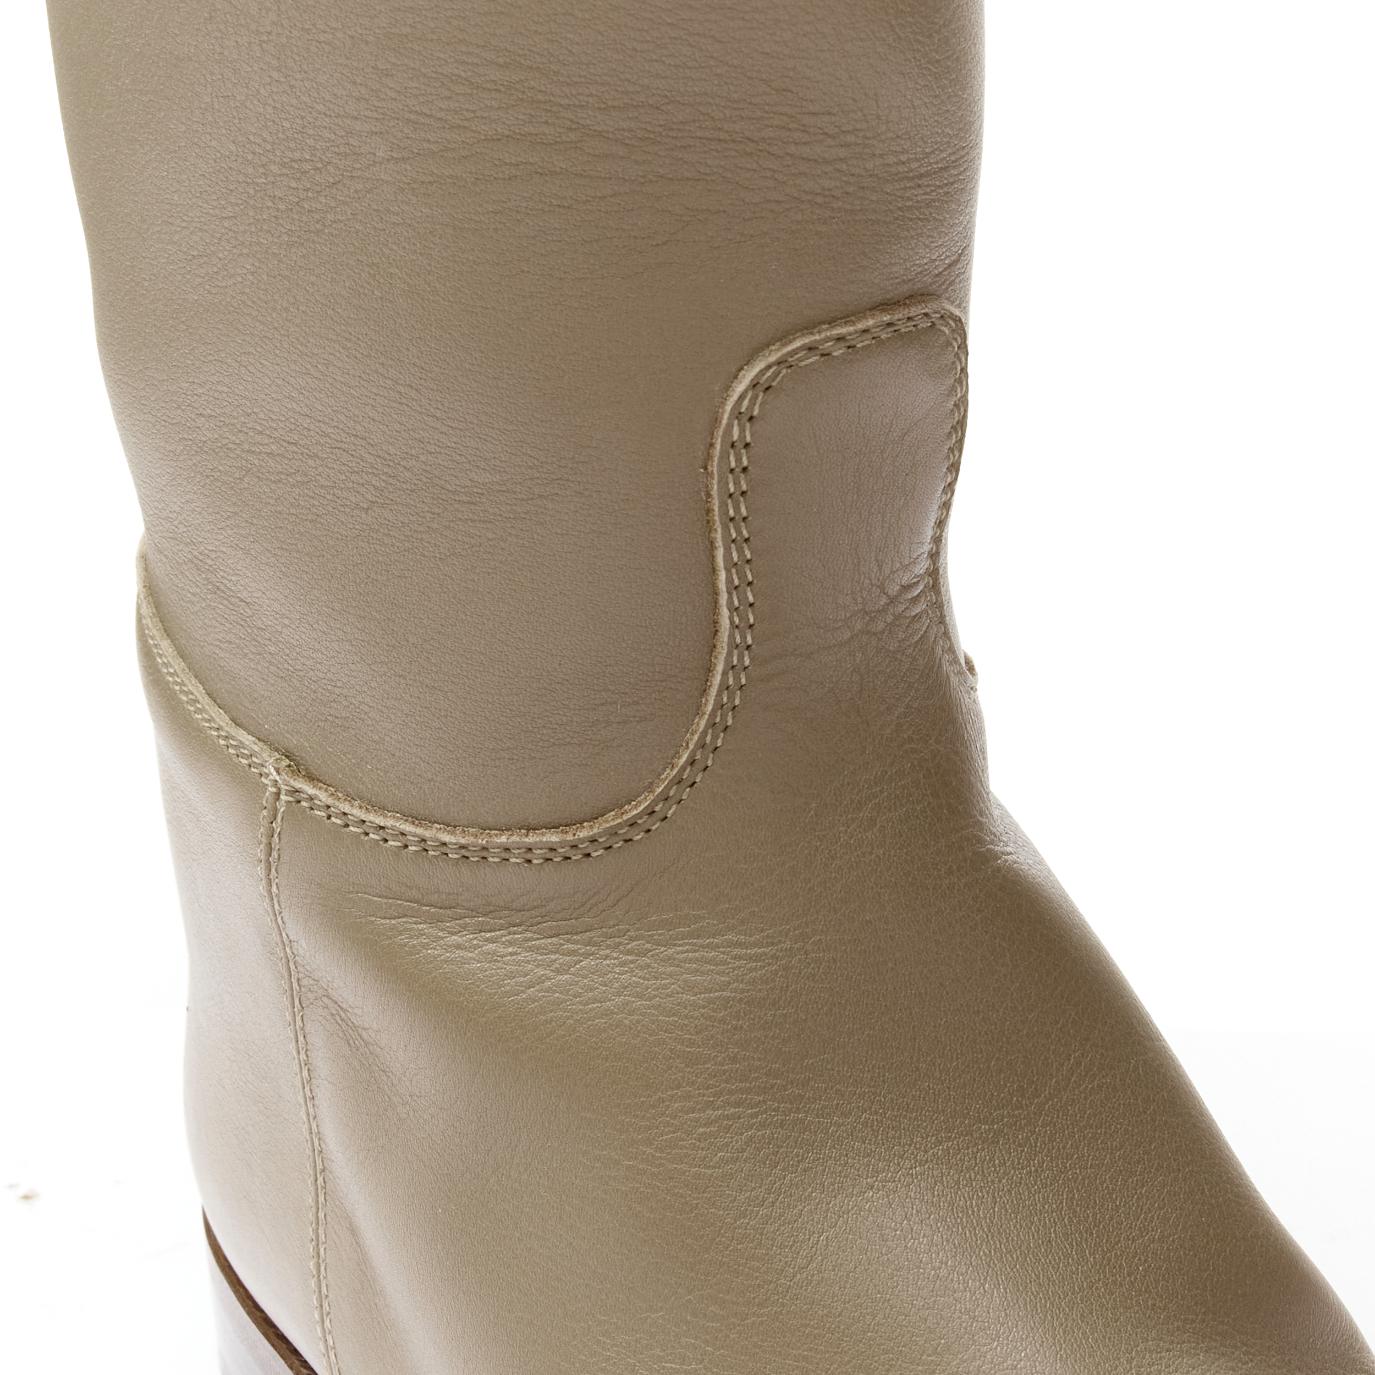 HERMES Kelly Jumping taupe brown PHW buckle riding boot EU37.5 For Sale 3